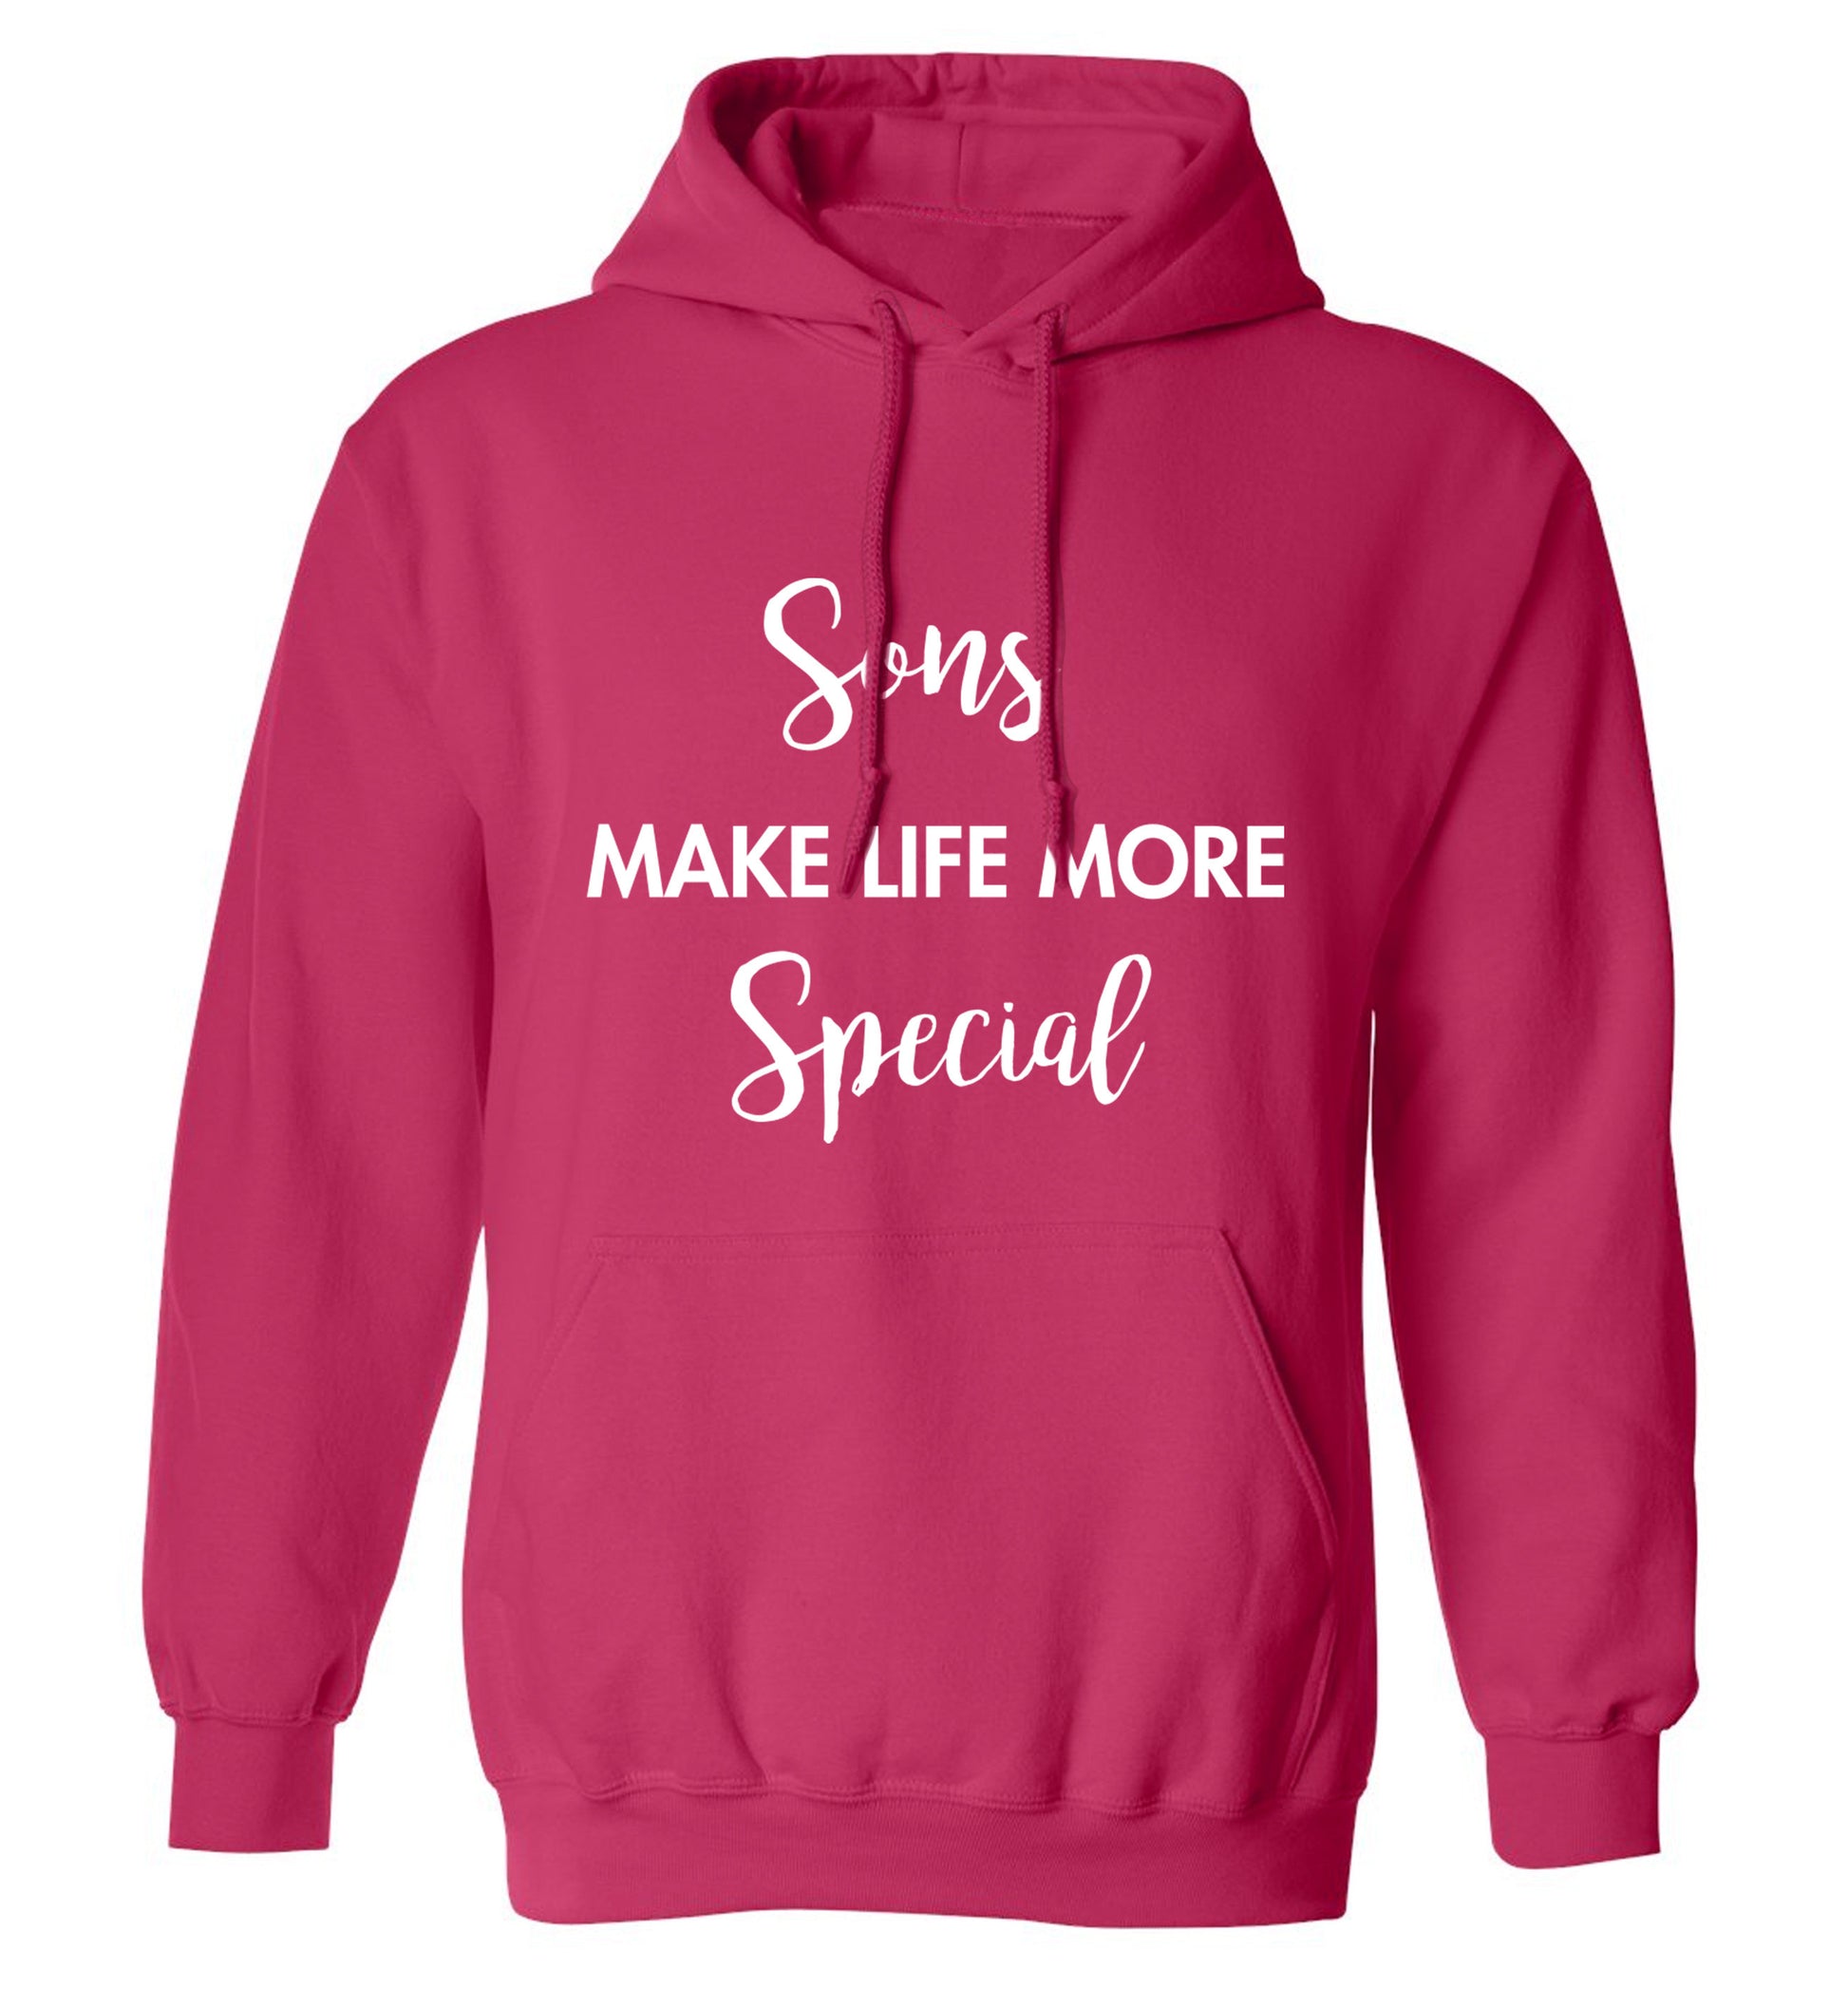 Sons make life more special adults unisex pink hoodie 2XL